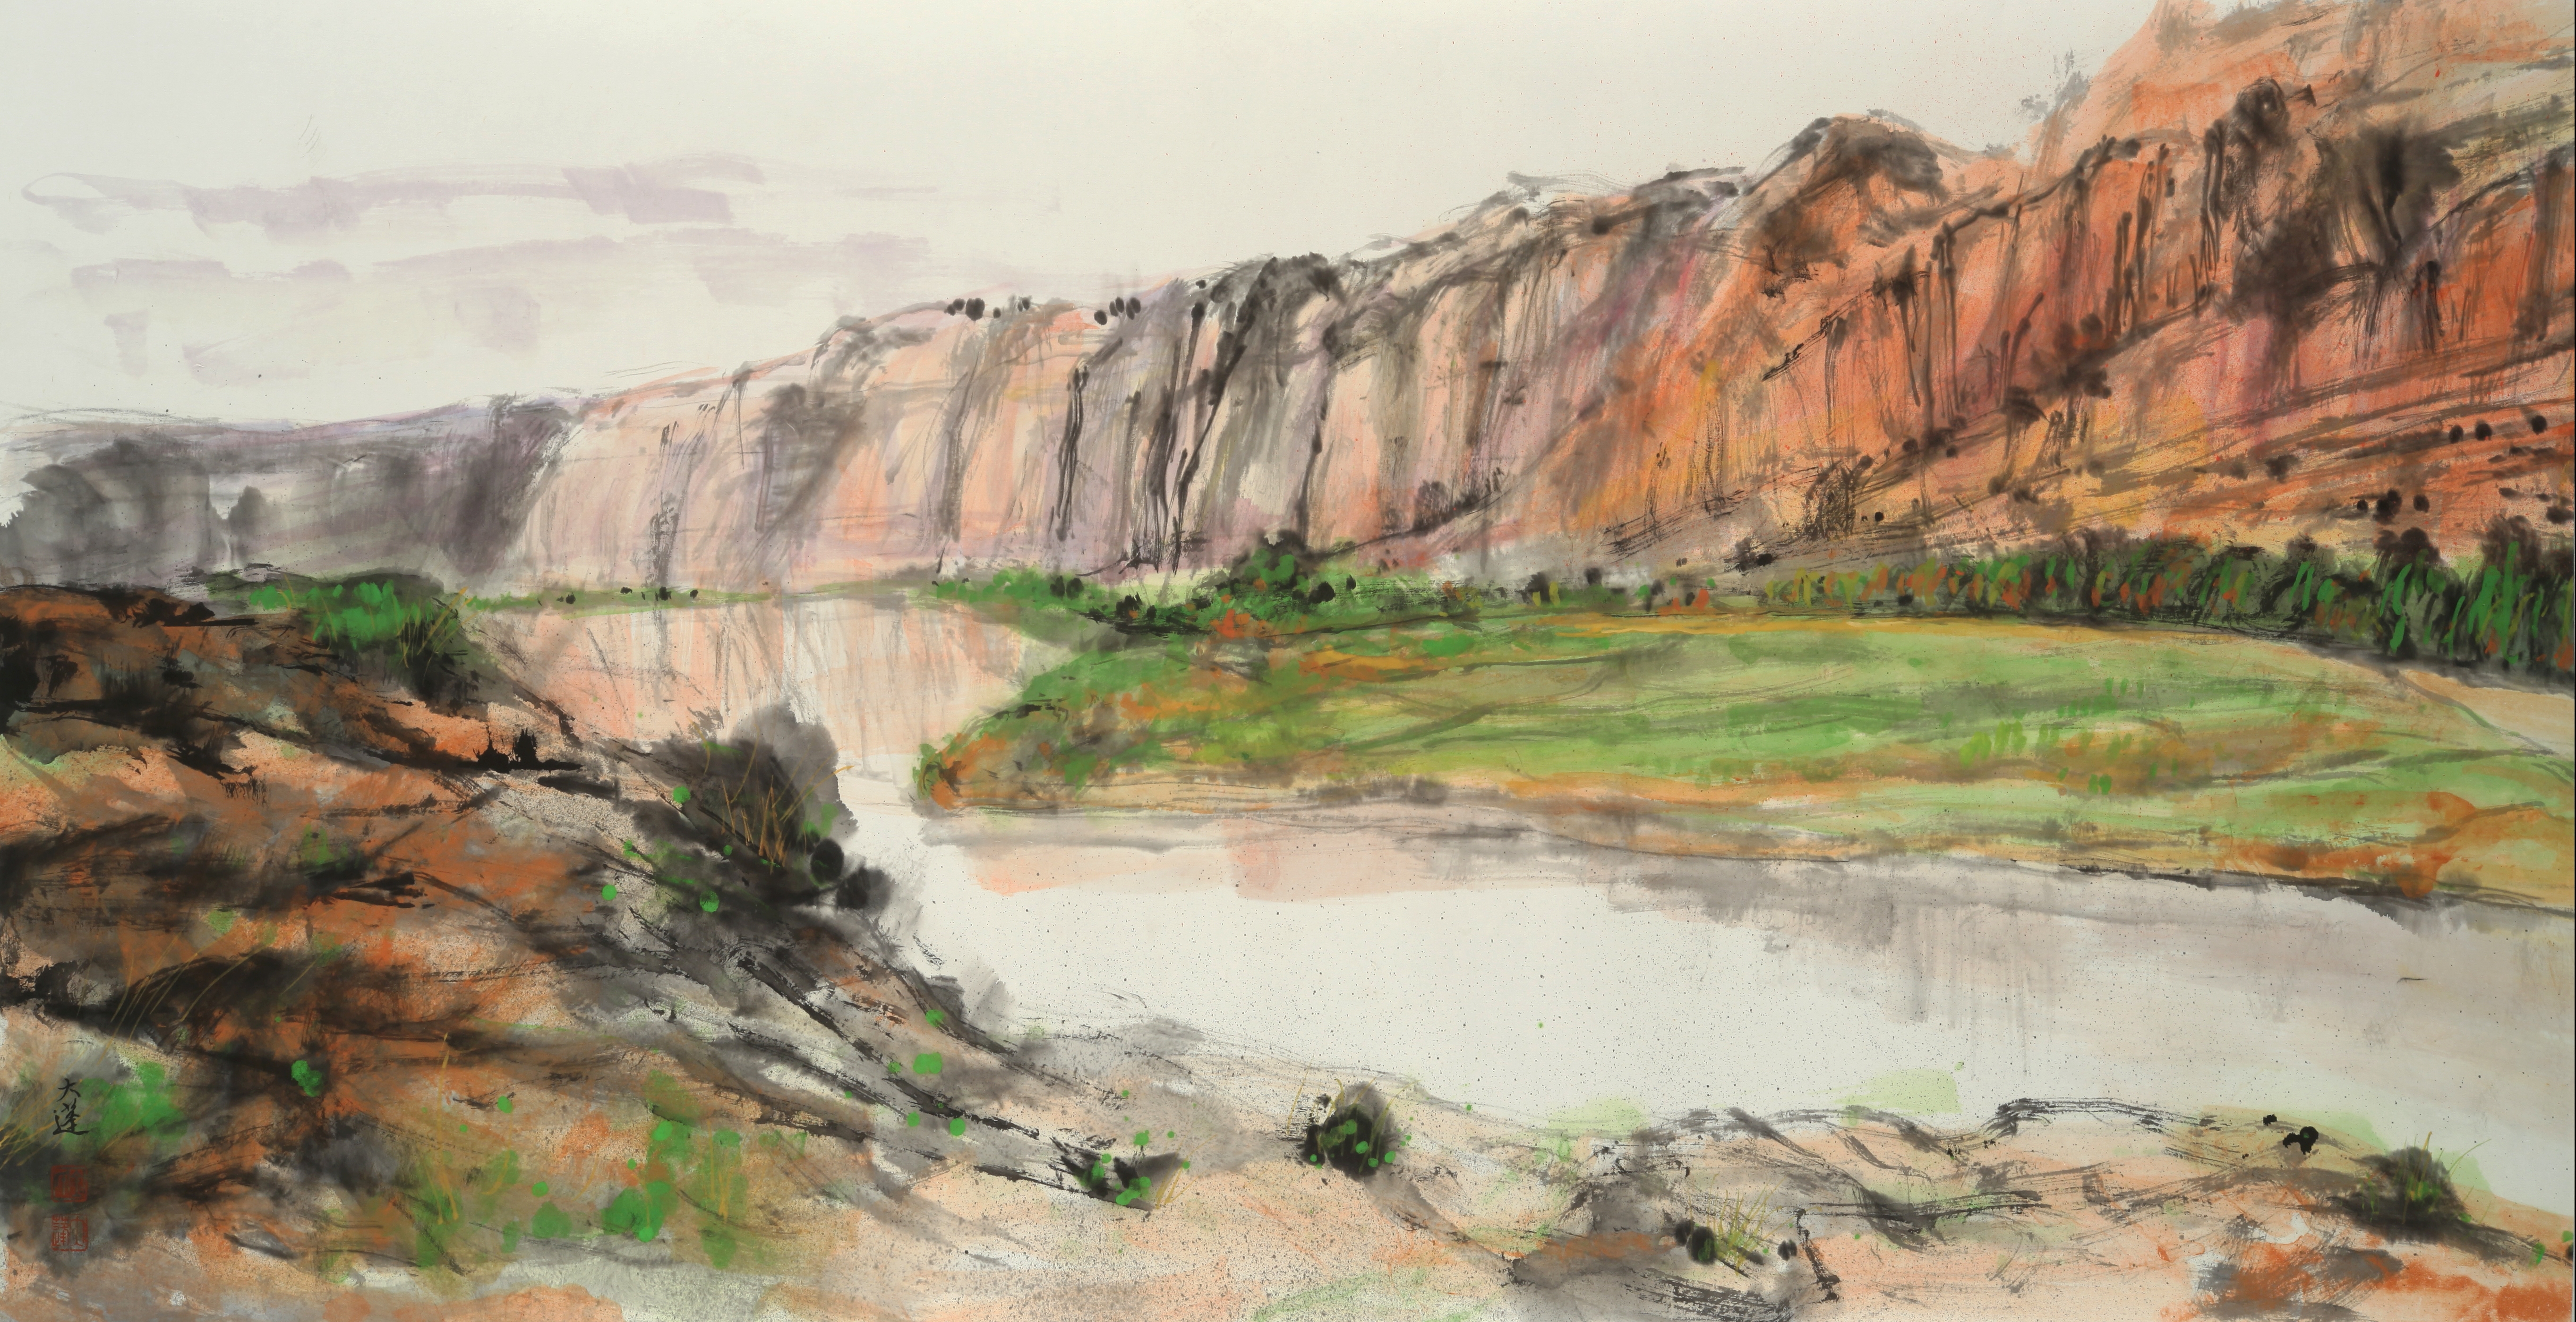 Contemporary Chinese Watercolor Painting of Zion National Park Hills.